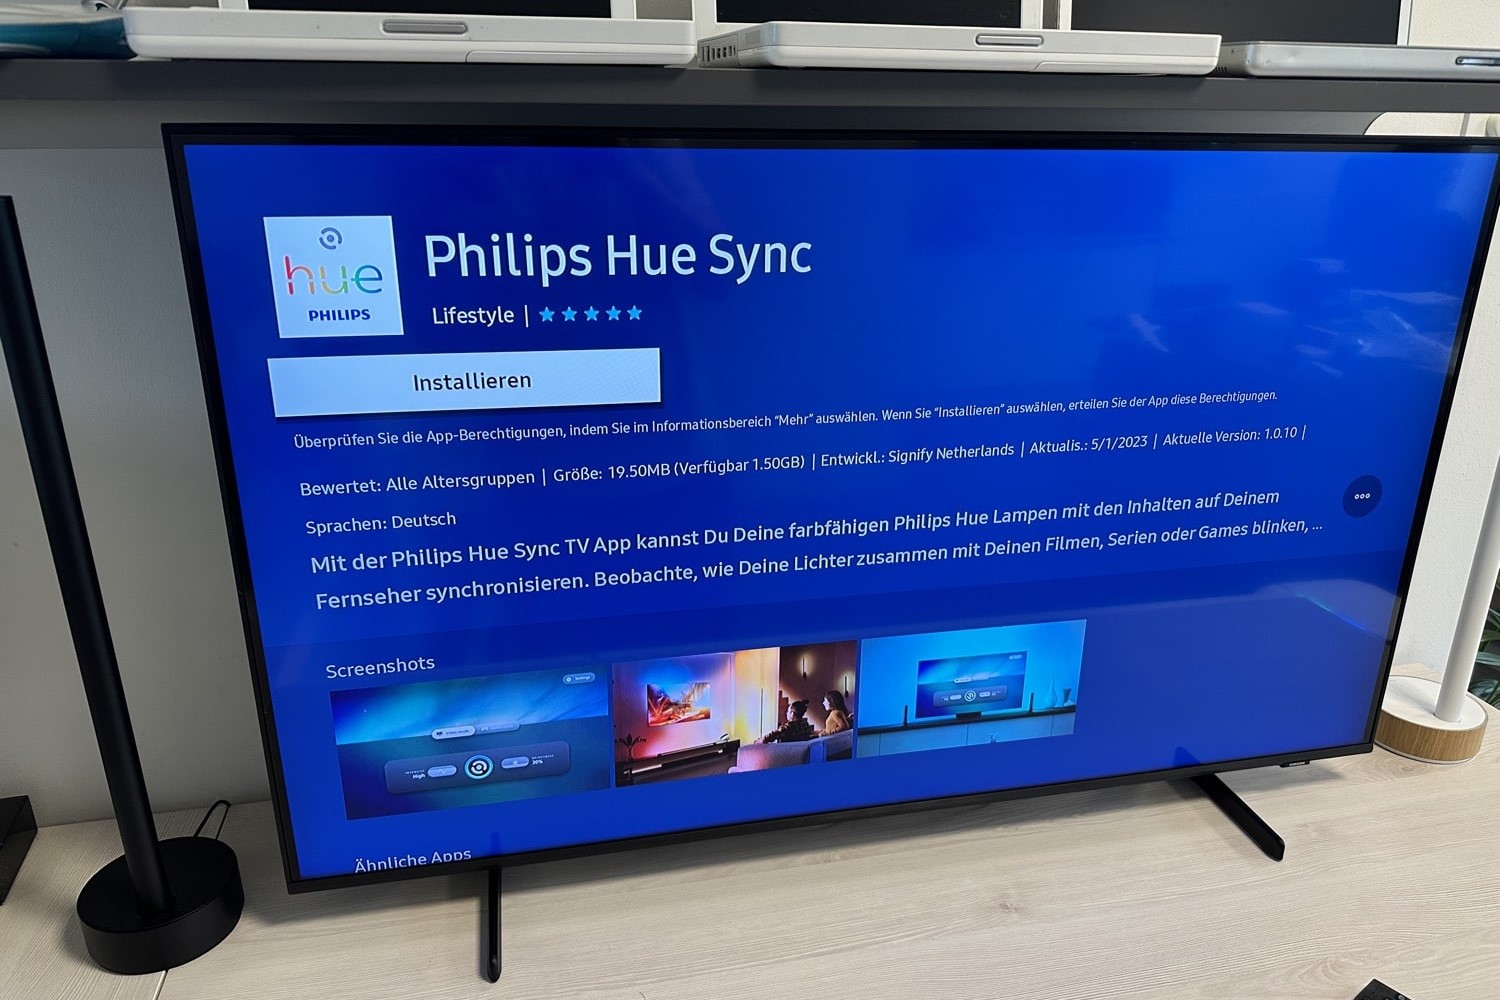 Philips Hue Sync Stops When Switching Users On Windows